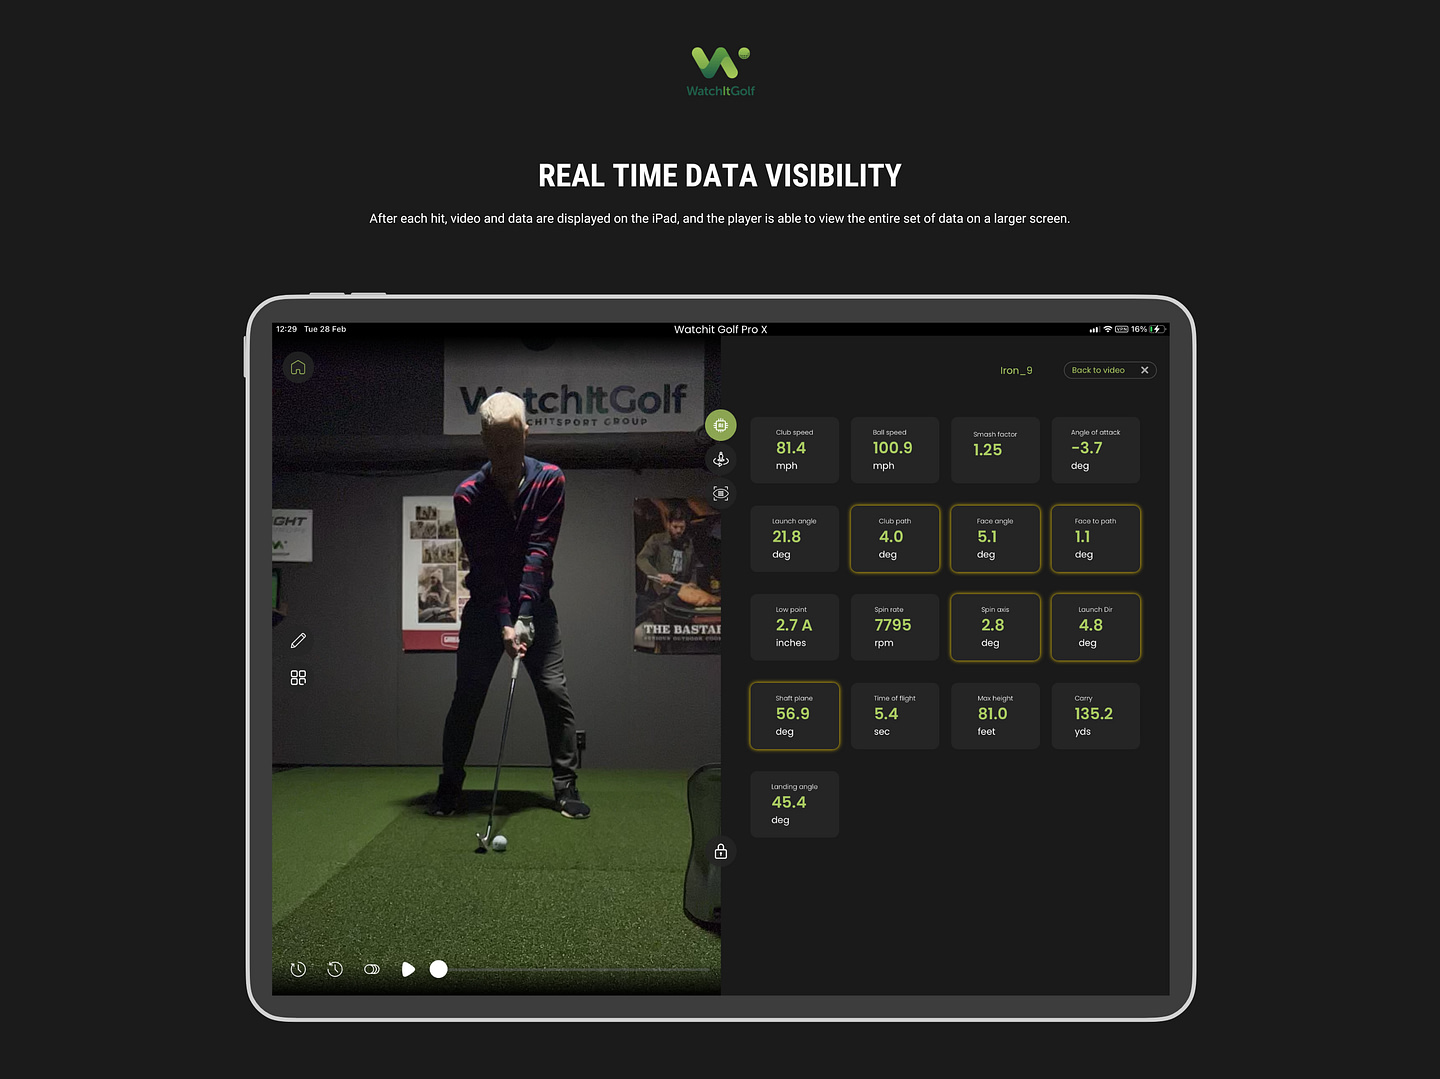 W PRO Player - Real time data visibility